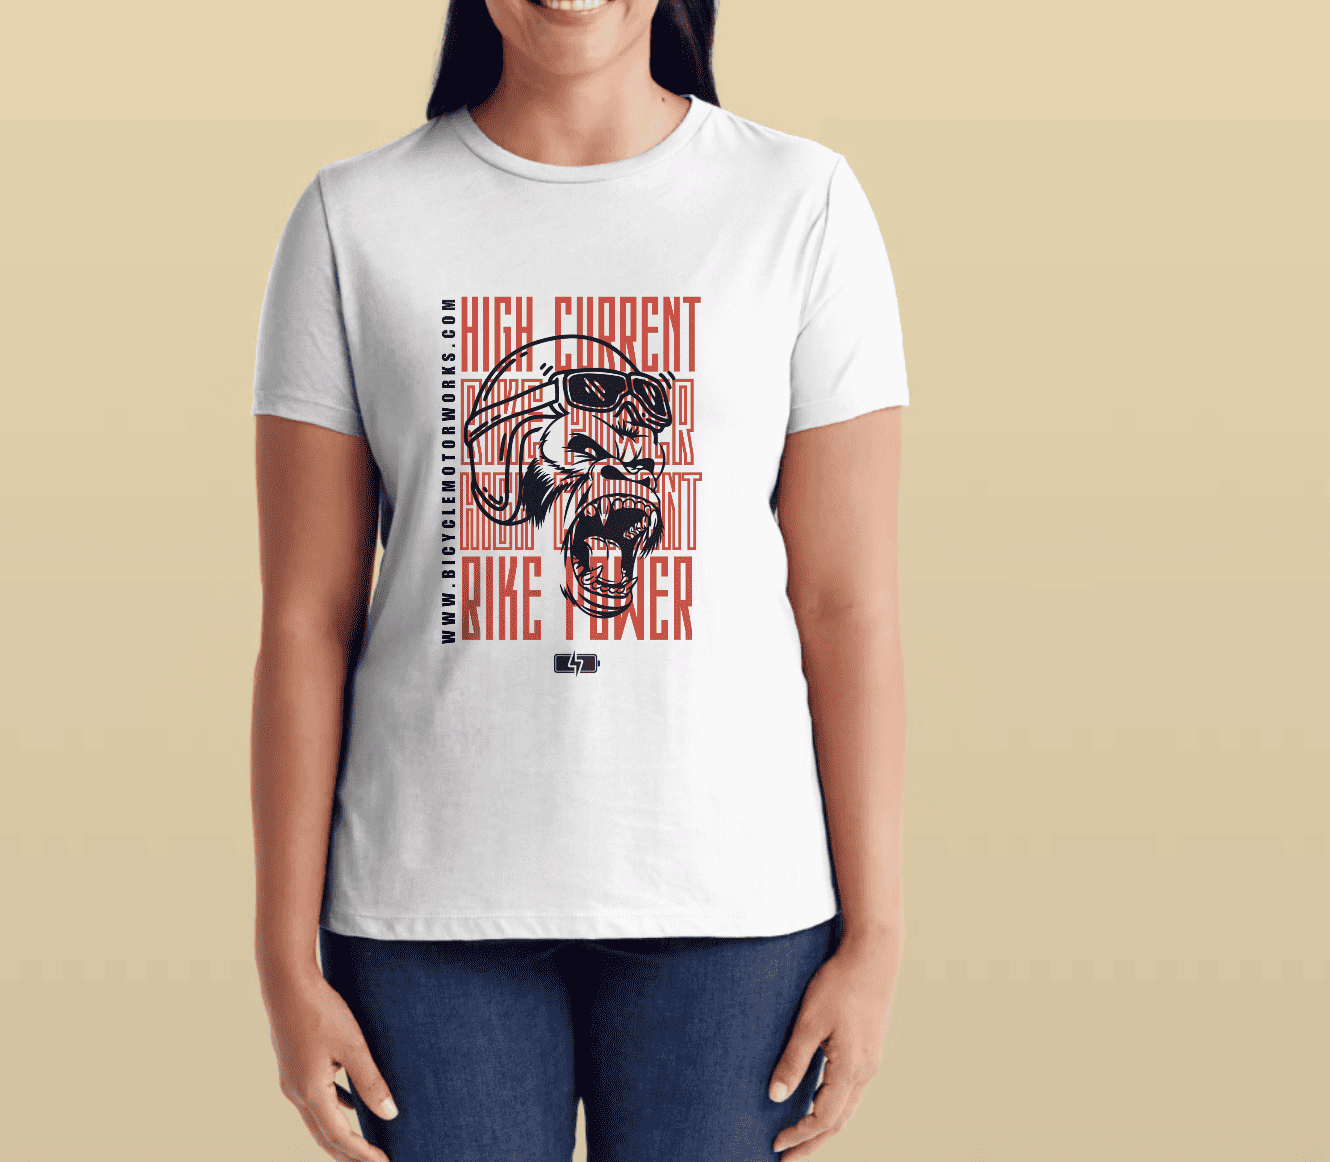 A woman wearing white t-shirt with image of tiger.